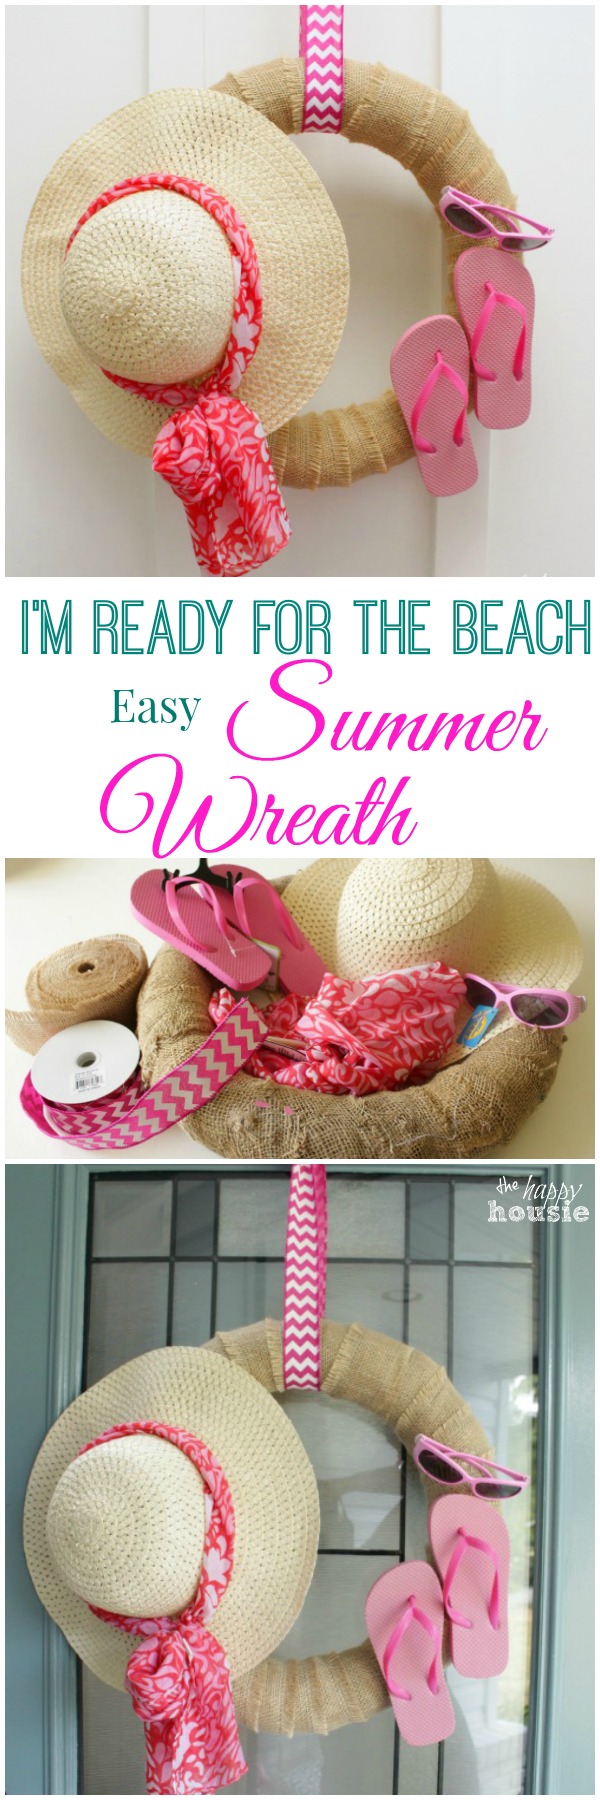 I'm Ready for the Beach Easy Summer Wreath poster.